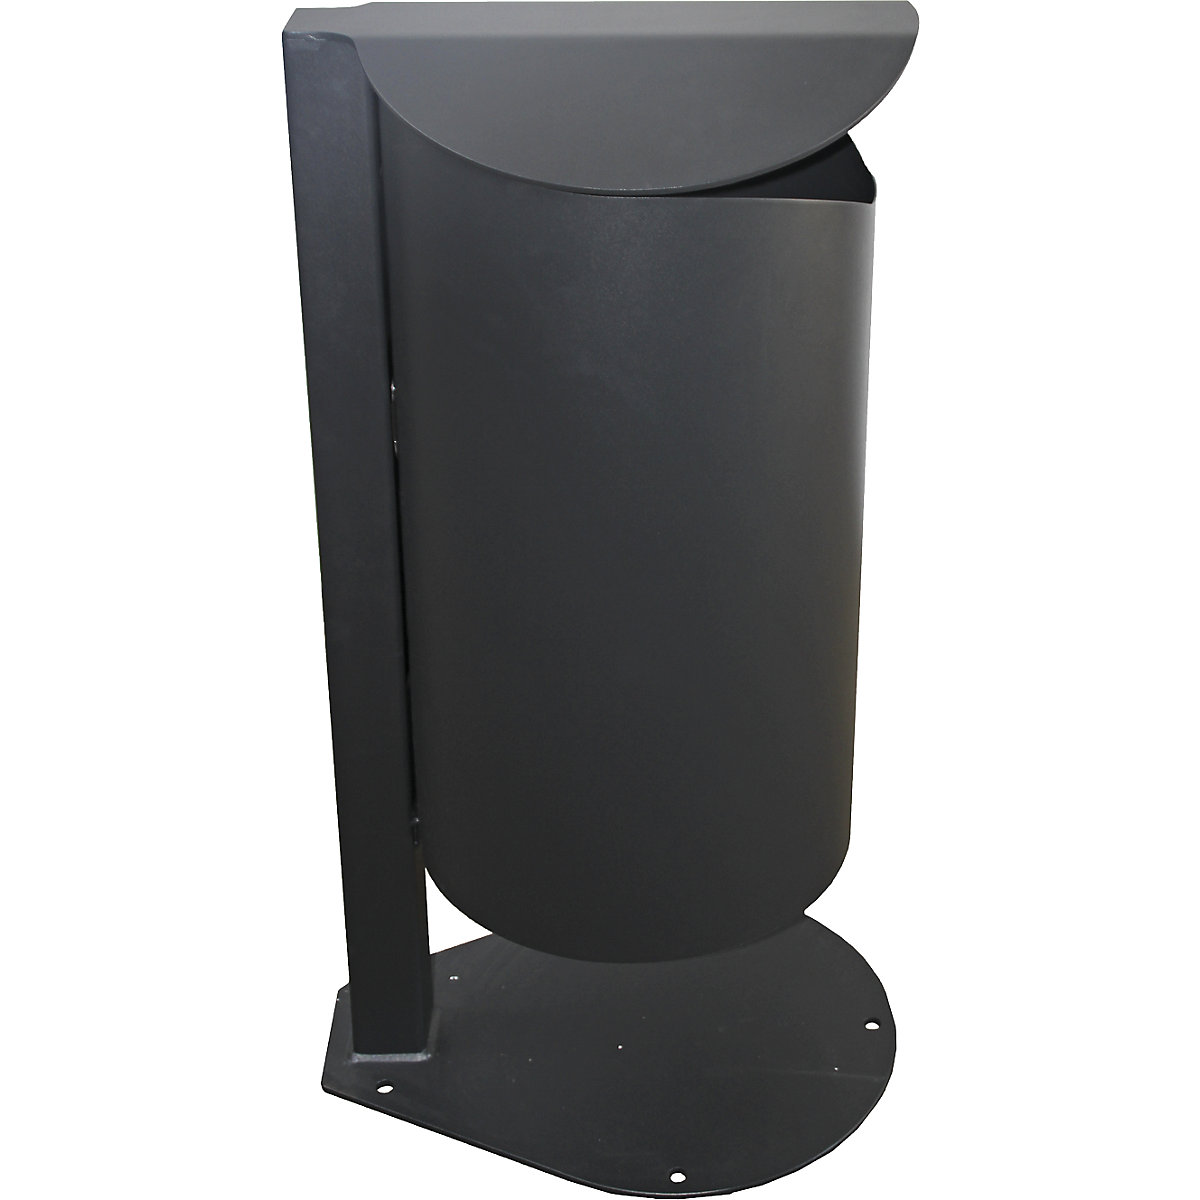 Outdoor waste collector with post